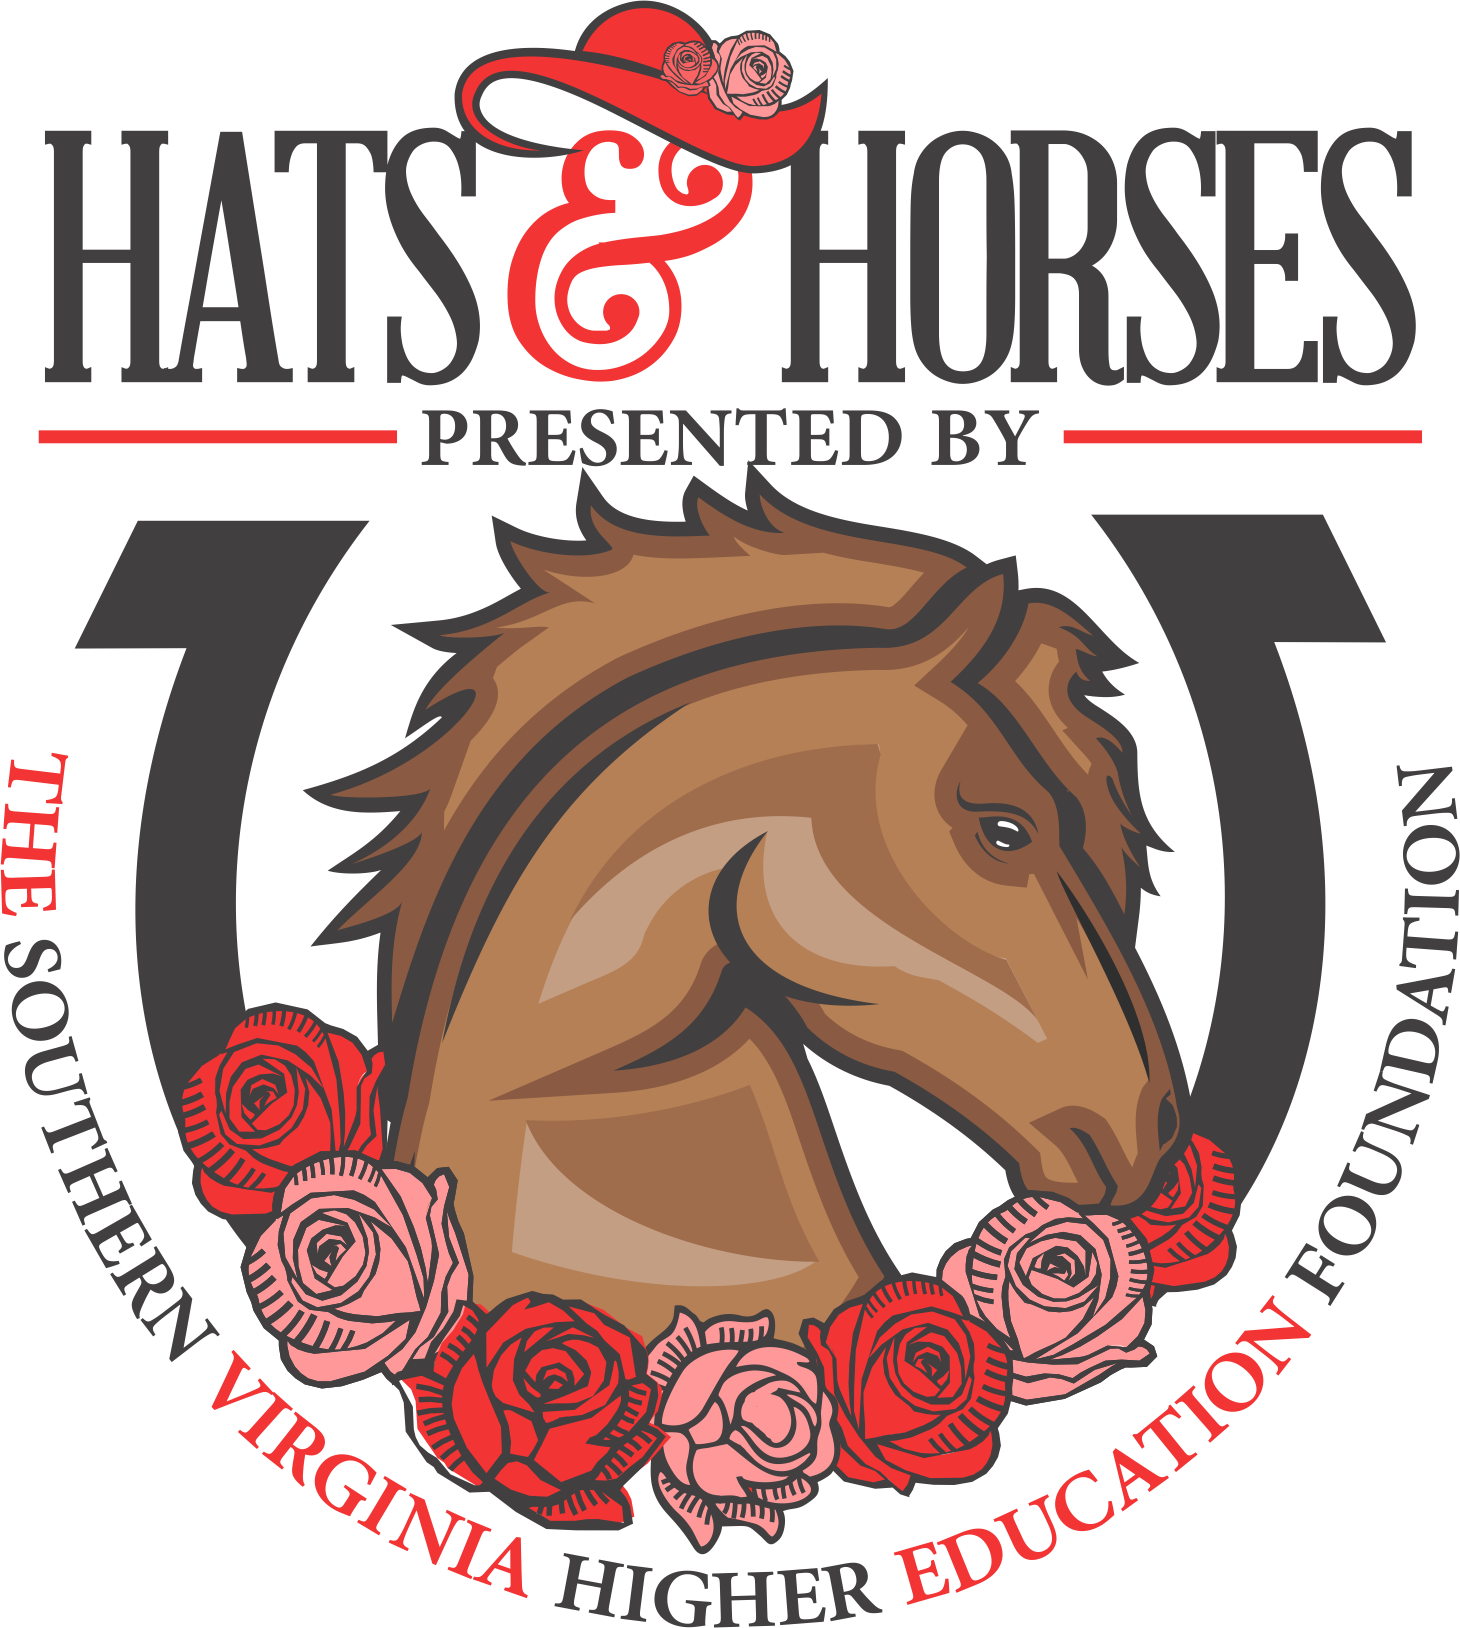 Hats & Horses - Southern Virginia Higher Education Foundation